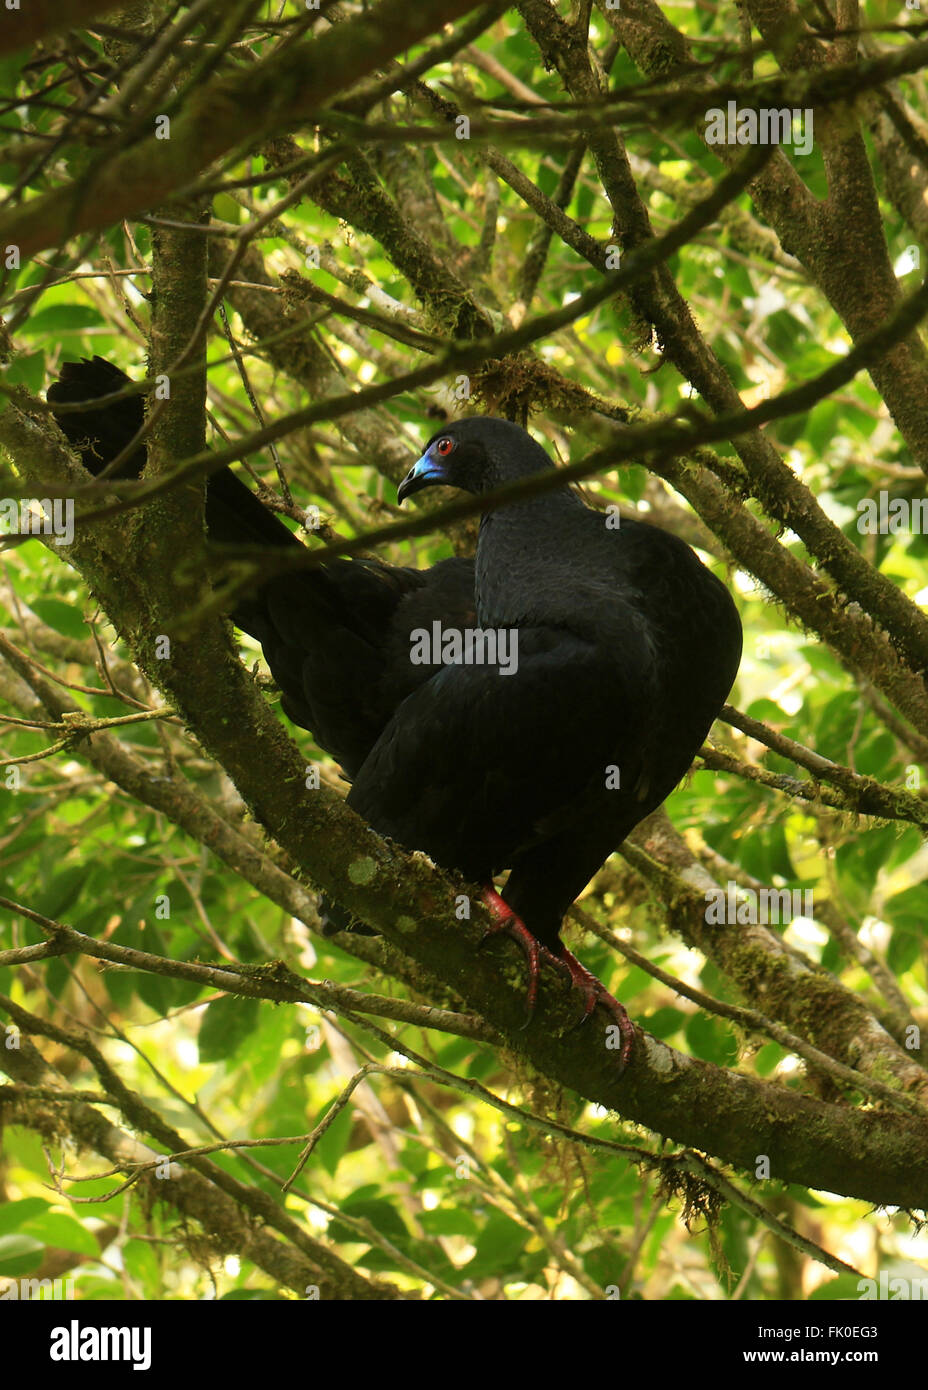 Black Guan with a bright blue bill in a tree in Arenal, Costa Rica Stock Photo